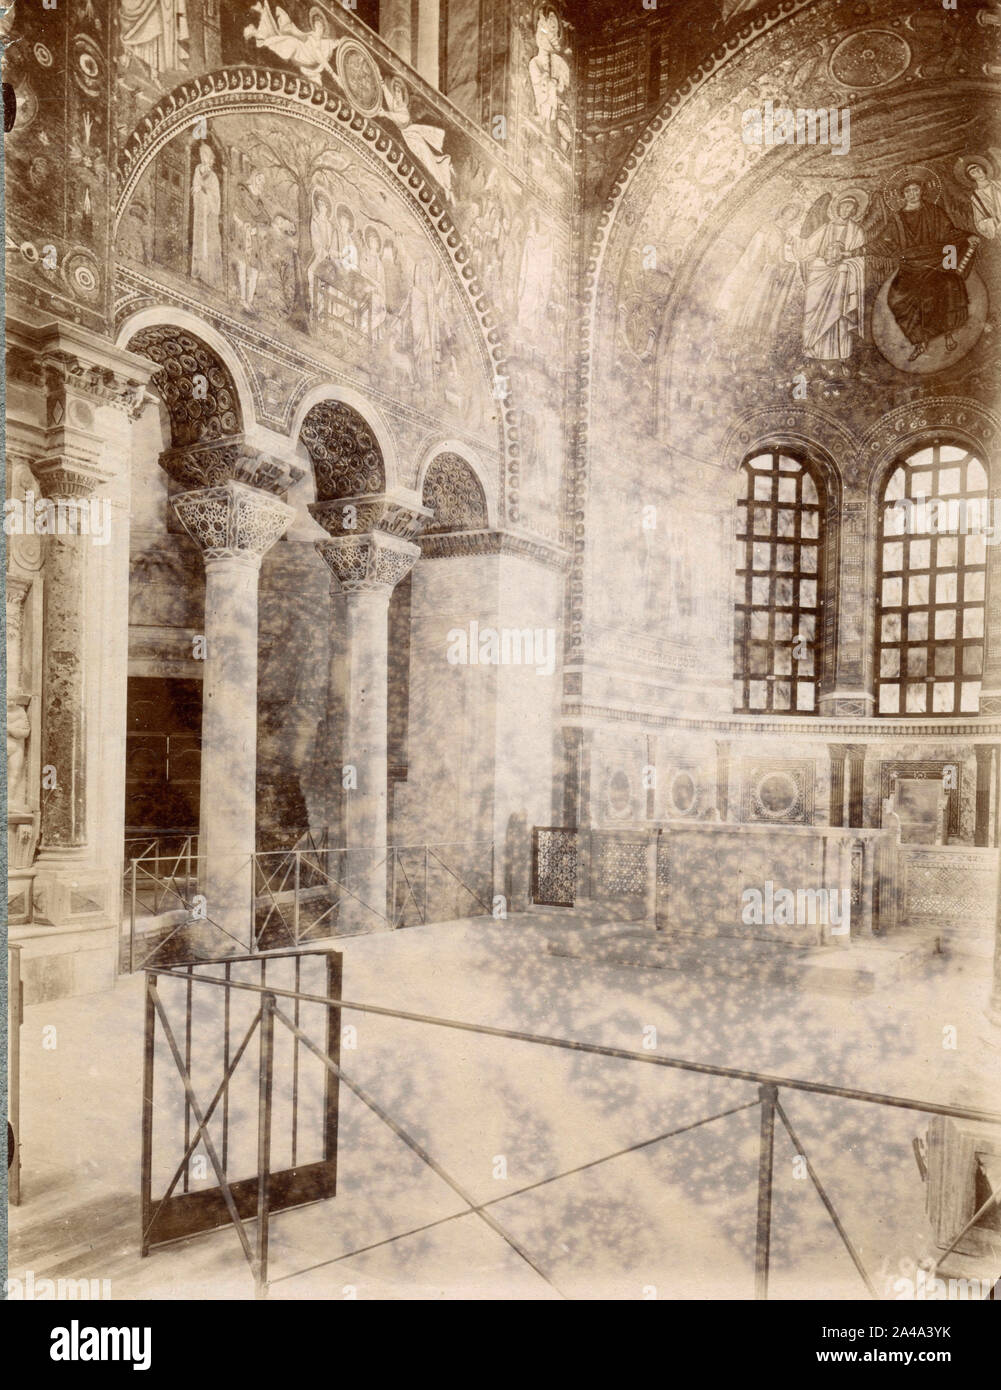 Columns and capitals in the church of St. Vitale, Ravenna, Italy, 1870s Stock Photo